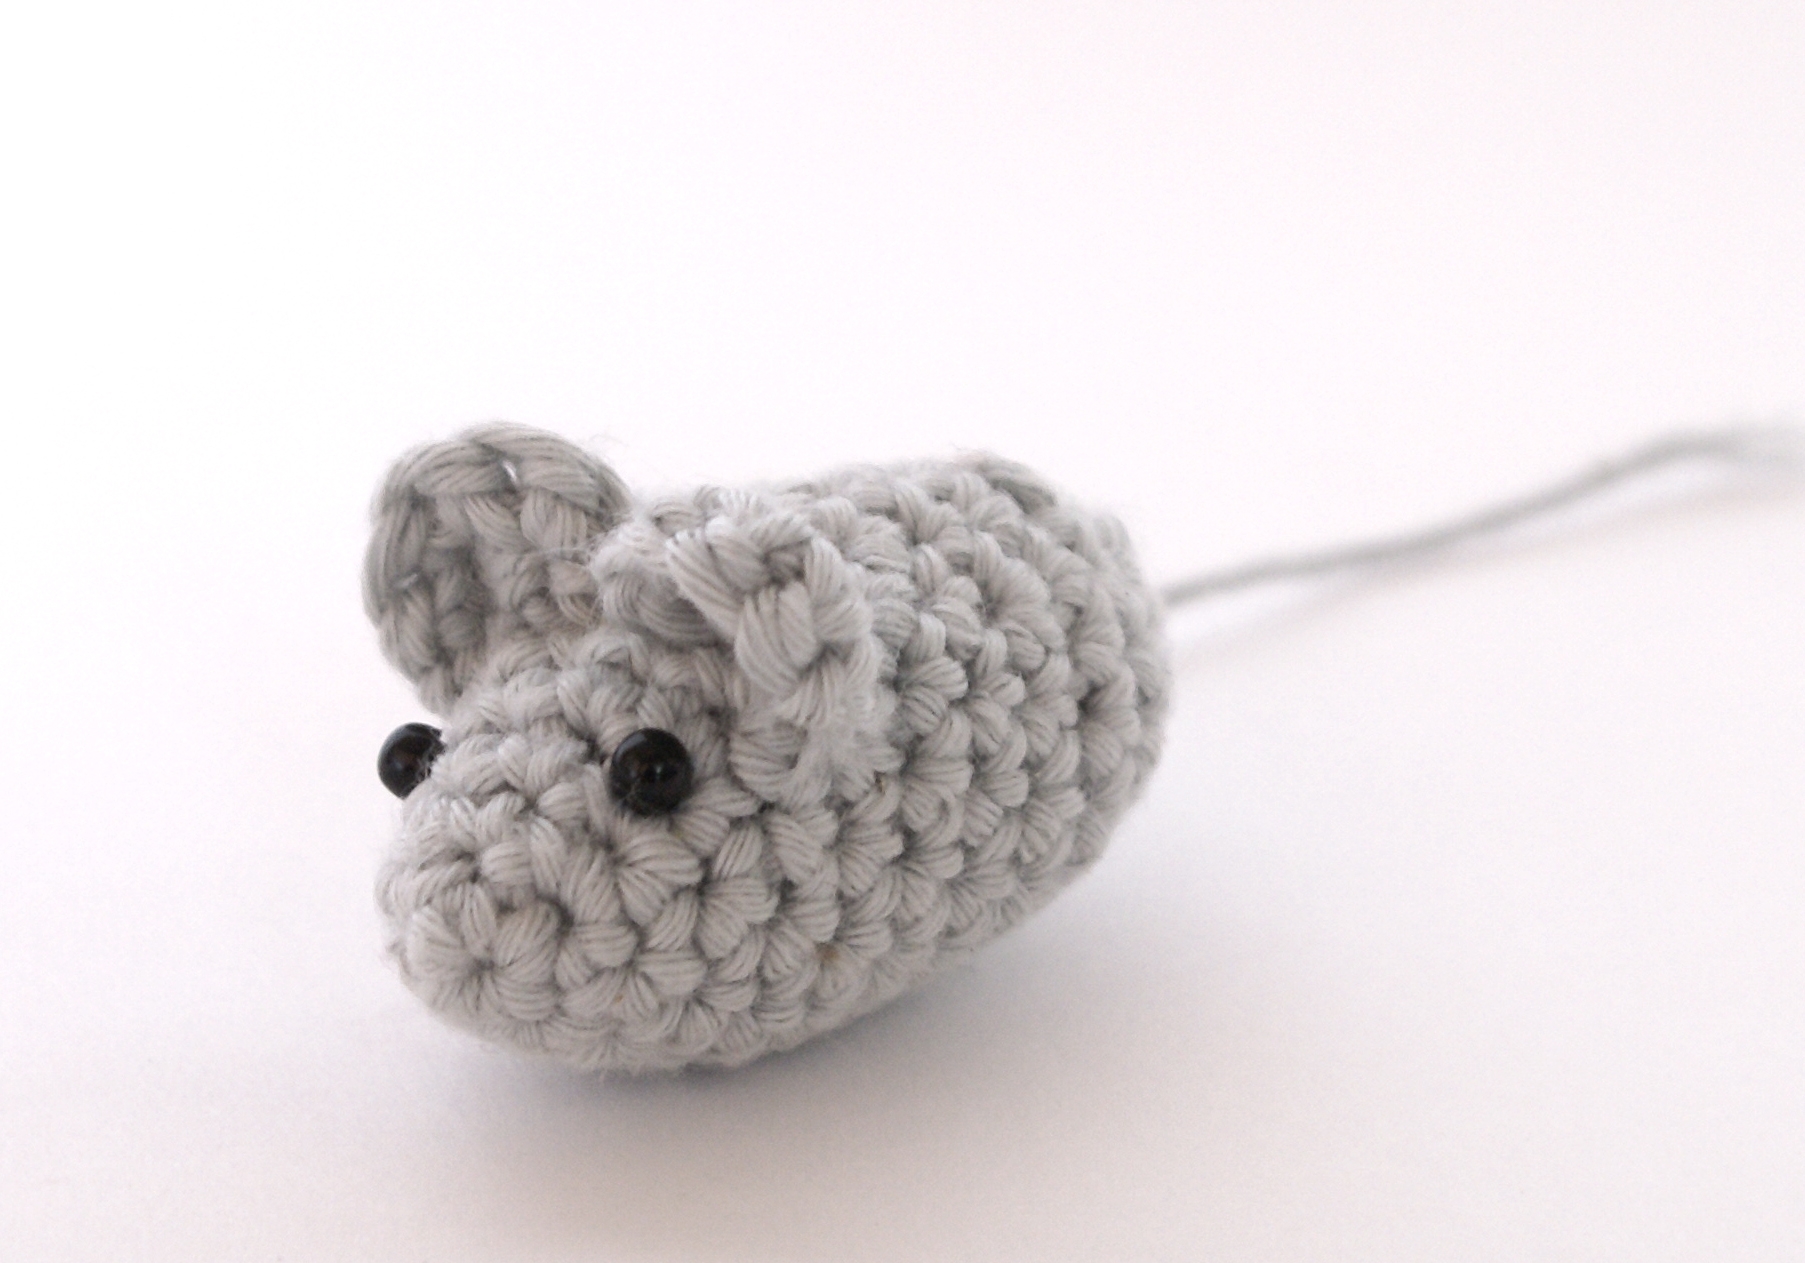 mouse crochet amigurumi free pattern with video tutorial